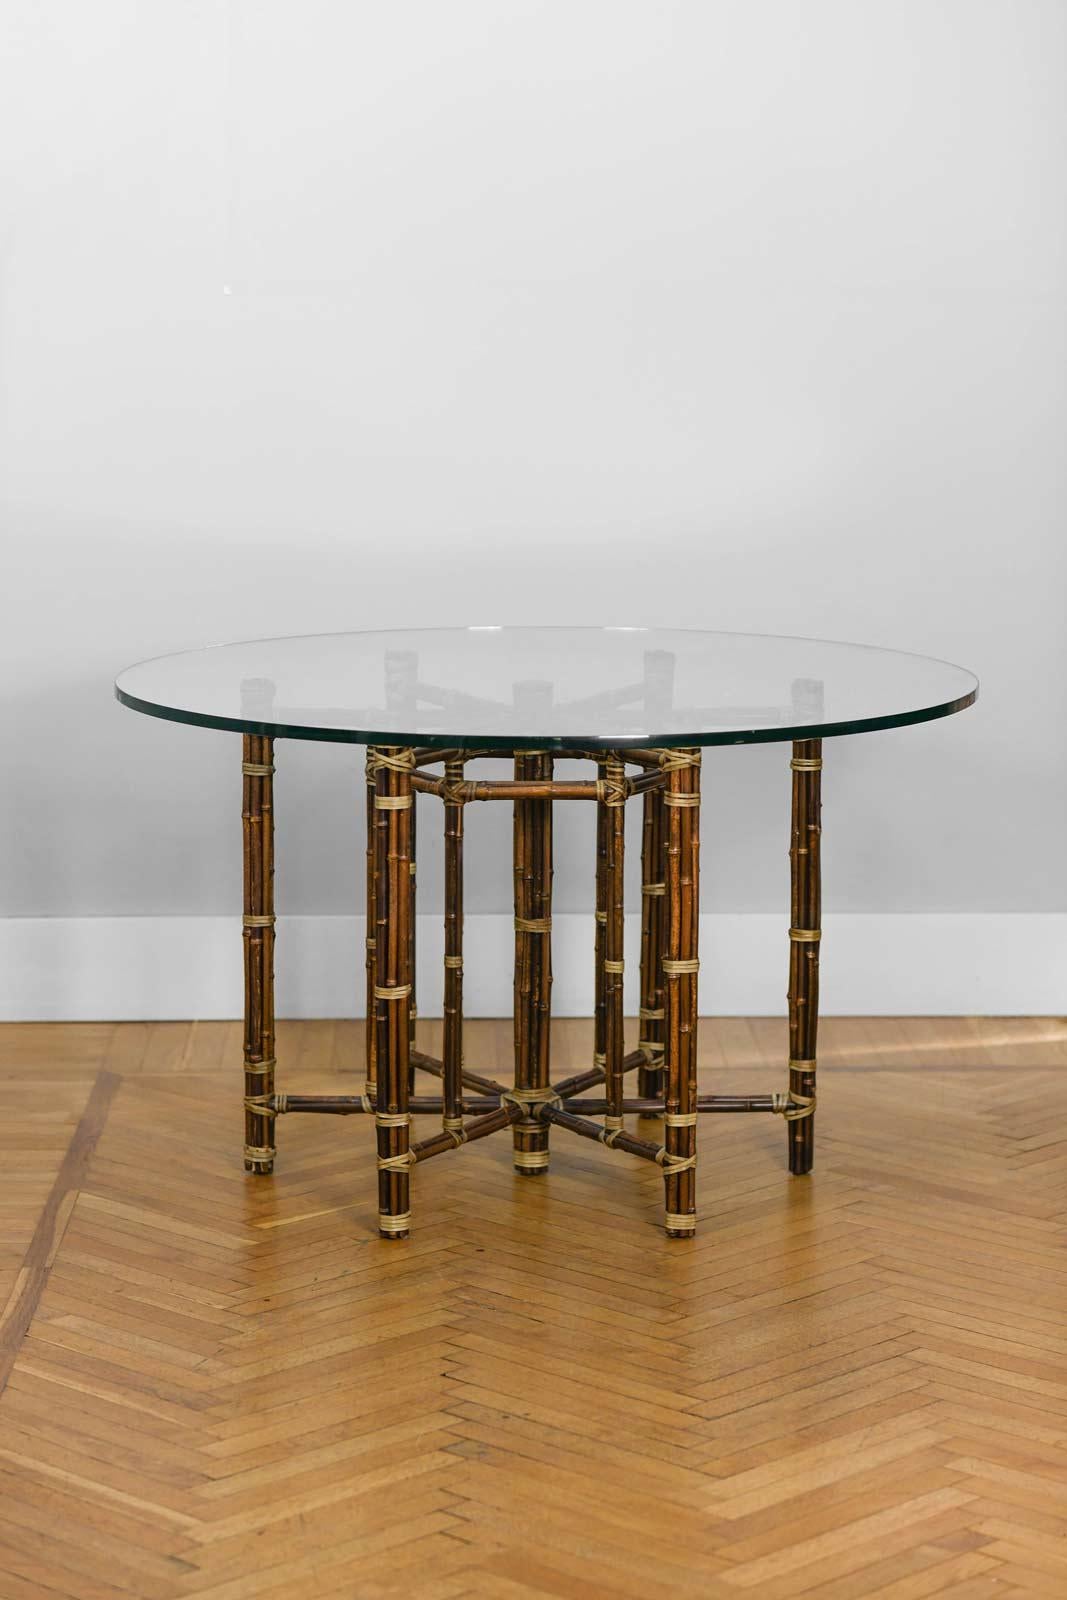 Round rattan table #McGuire San Francisco 1970
Product details
Glass shelf and leather bindings.
Dimensions: 125 W x 74 H x 125 D cm